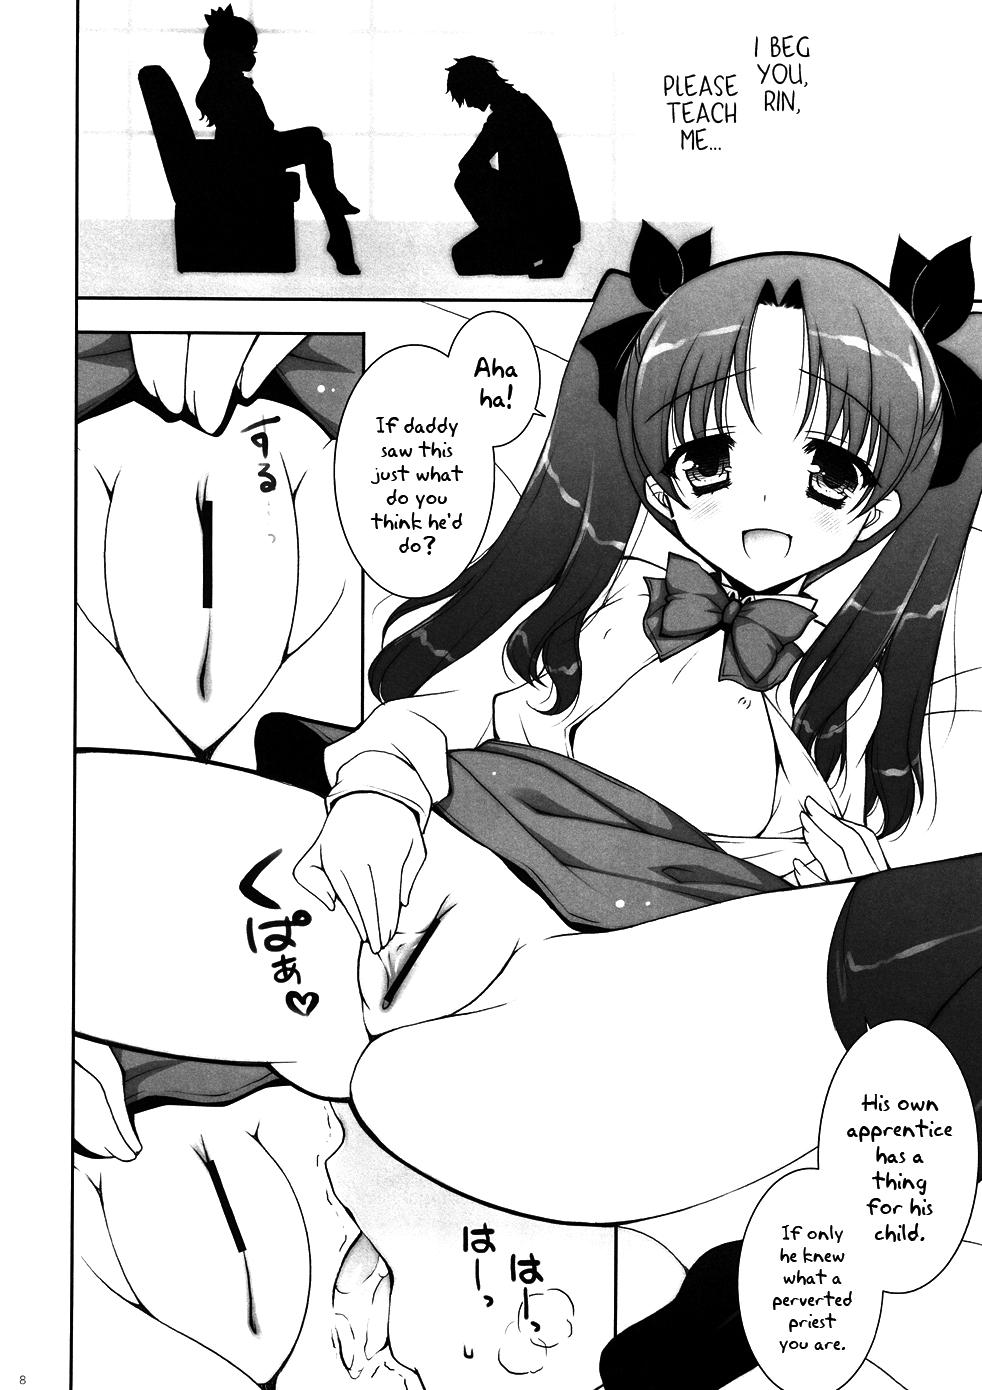 Office The Aggressive Lolis I Come up with Are the Greatest!! - Fate zero Gay Twinks - Page 7